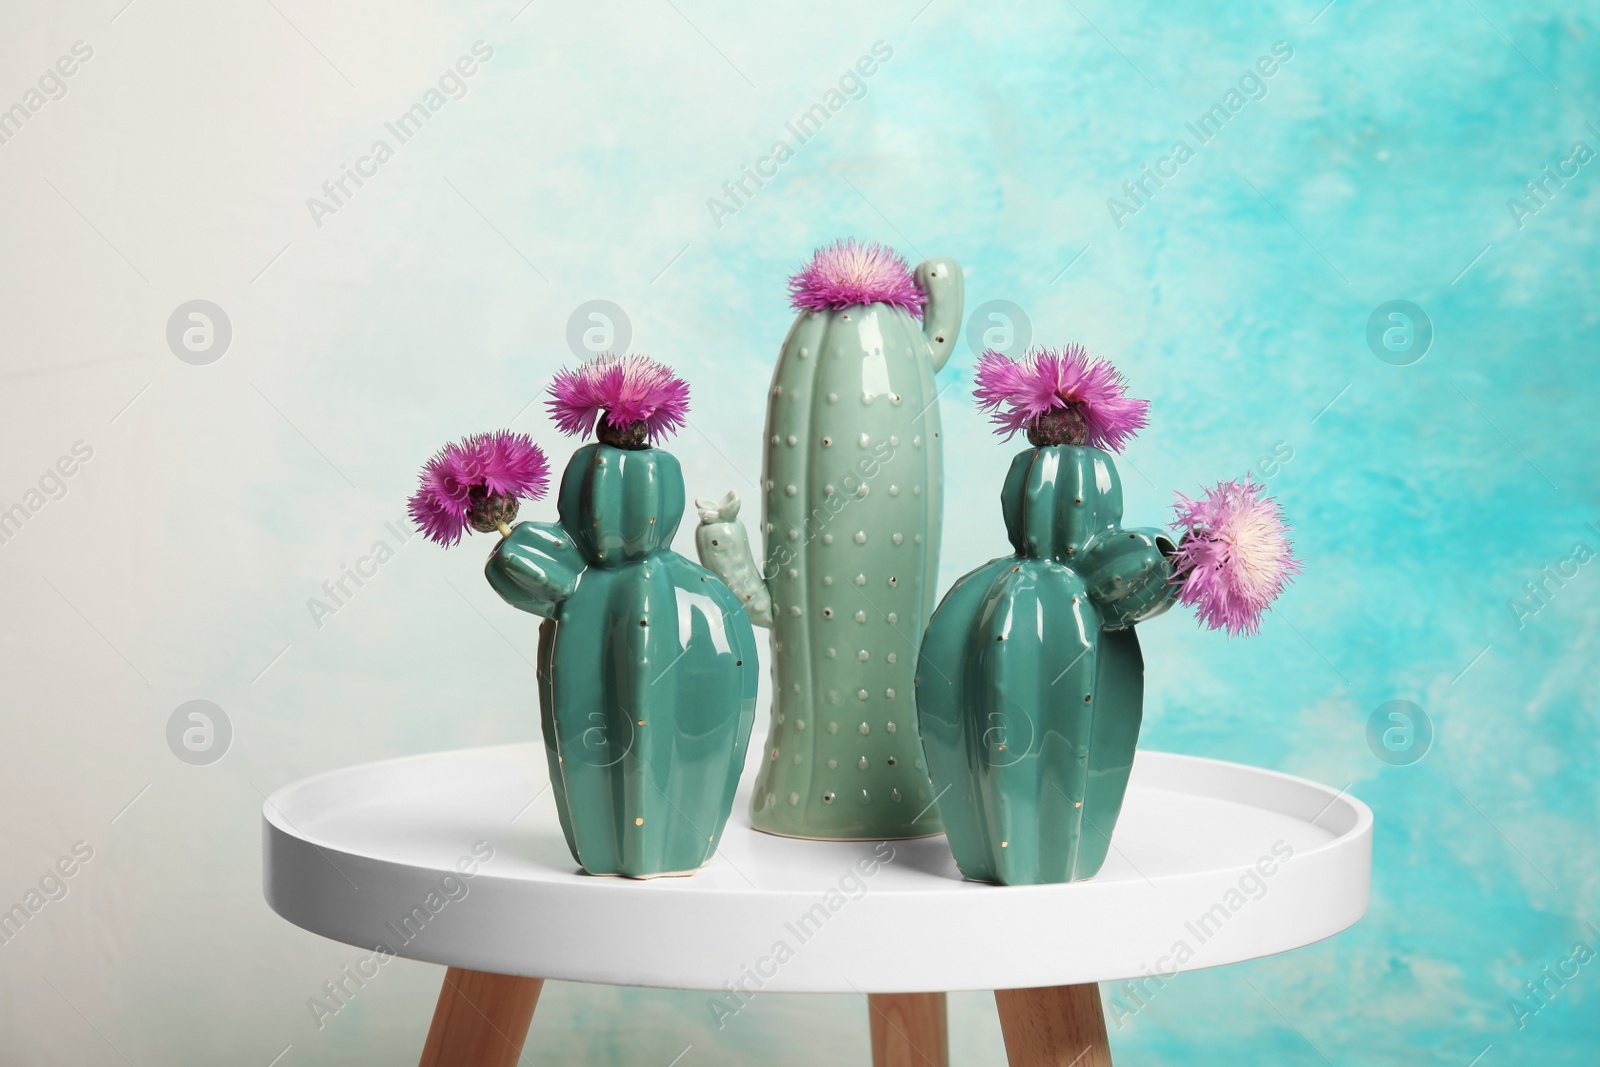 Photo of Trendy cactus shaped ceramic vases with flowers on table